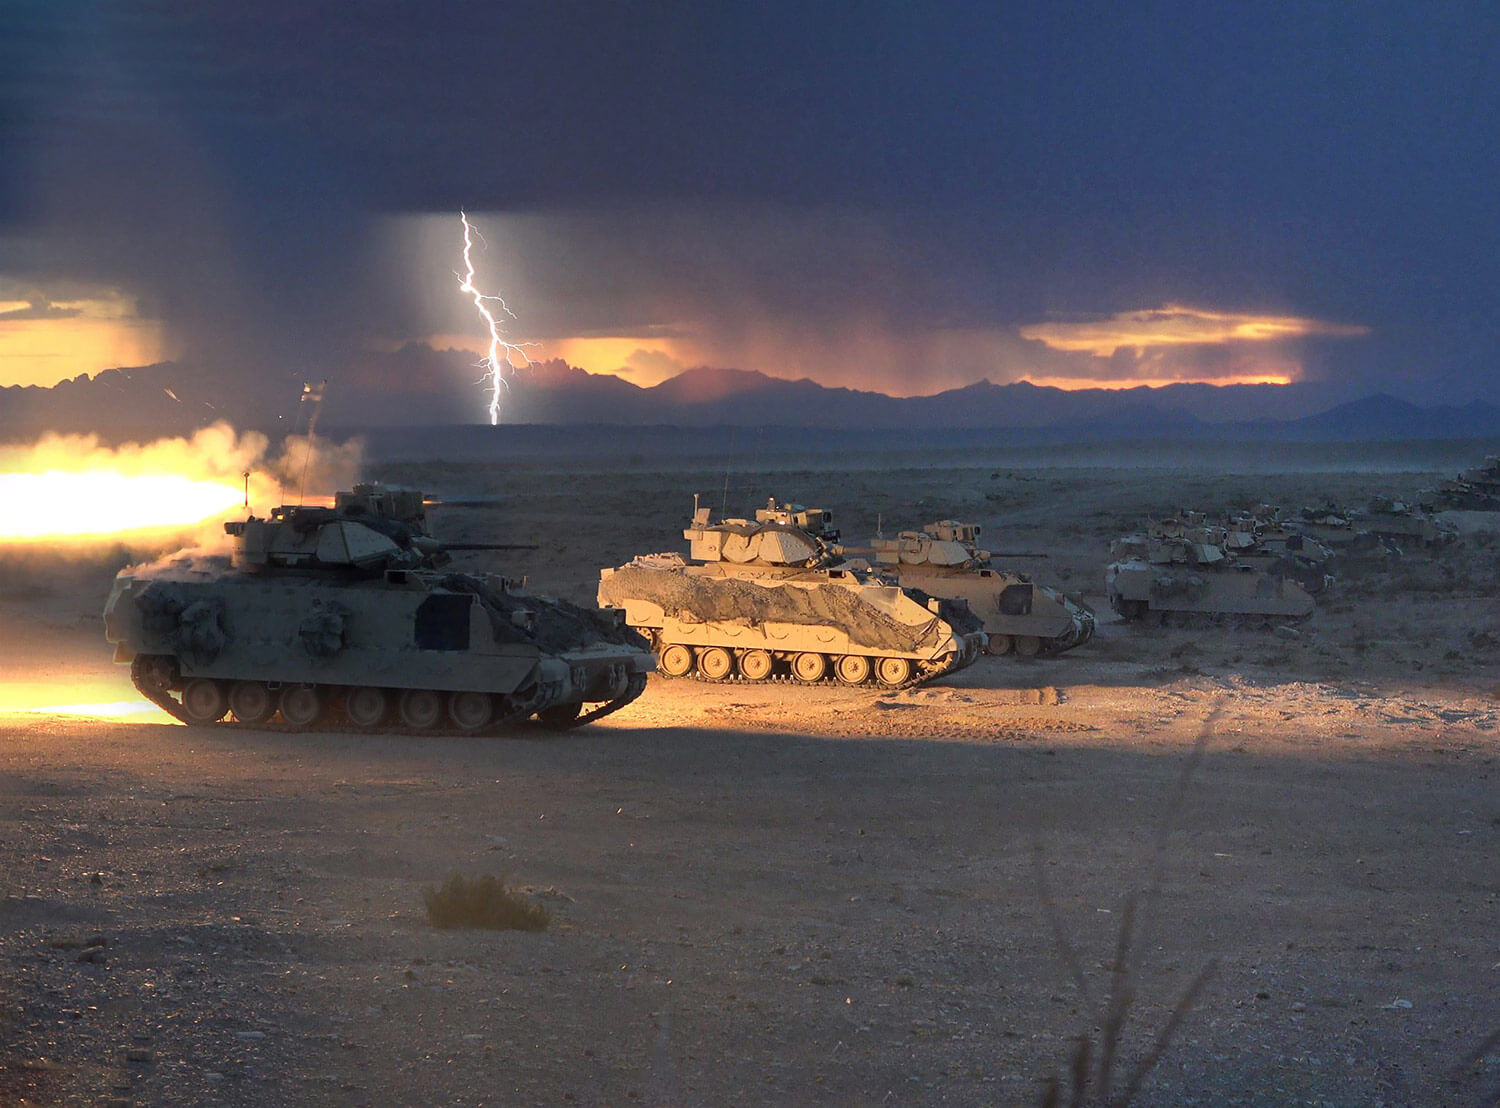 Lightning strikes as Bradley Fighting Vehicles from the 1st Battalion, 150th Cavalry Regiment of the 30th Armored Brigade Combat Team, fire tube-launched, optically tracked, wire-guided (TOW) missiles during a Combined Arms Live Fire Exercise (CALFEX) at Fort Bliss, Texas, in August 2018. This CALFEX is part of the Army National Guard’s eXportable Combat Training Capability program, an instrumented brigade field training exercise designed to certify platoon proficiency in coordination with First Army. North Carolina Army National Guard Photo by SSG Brendan Stephens